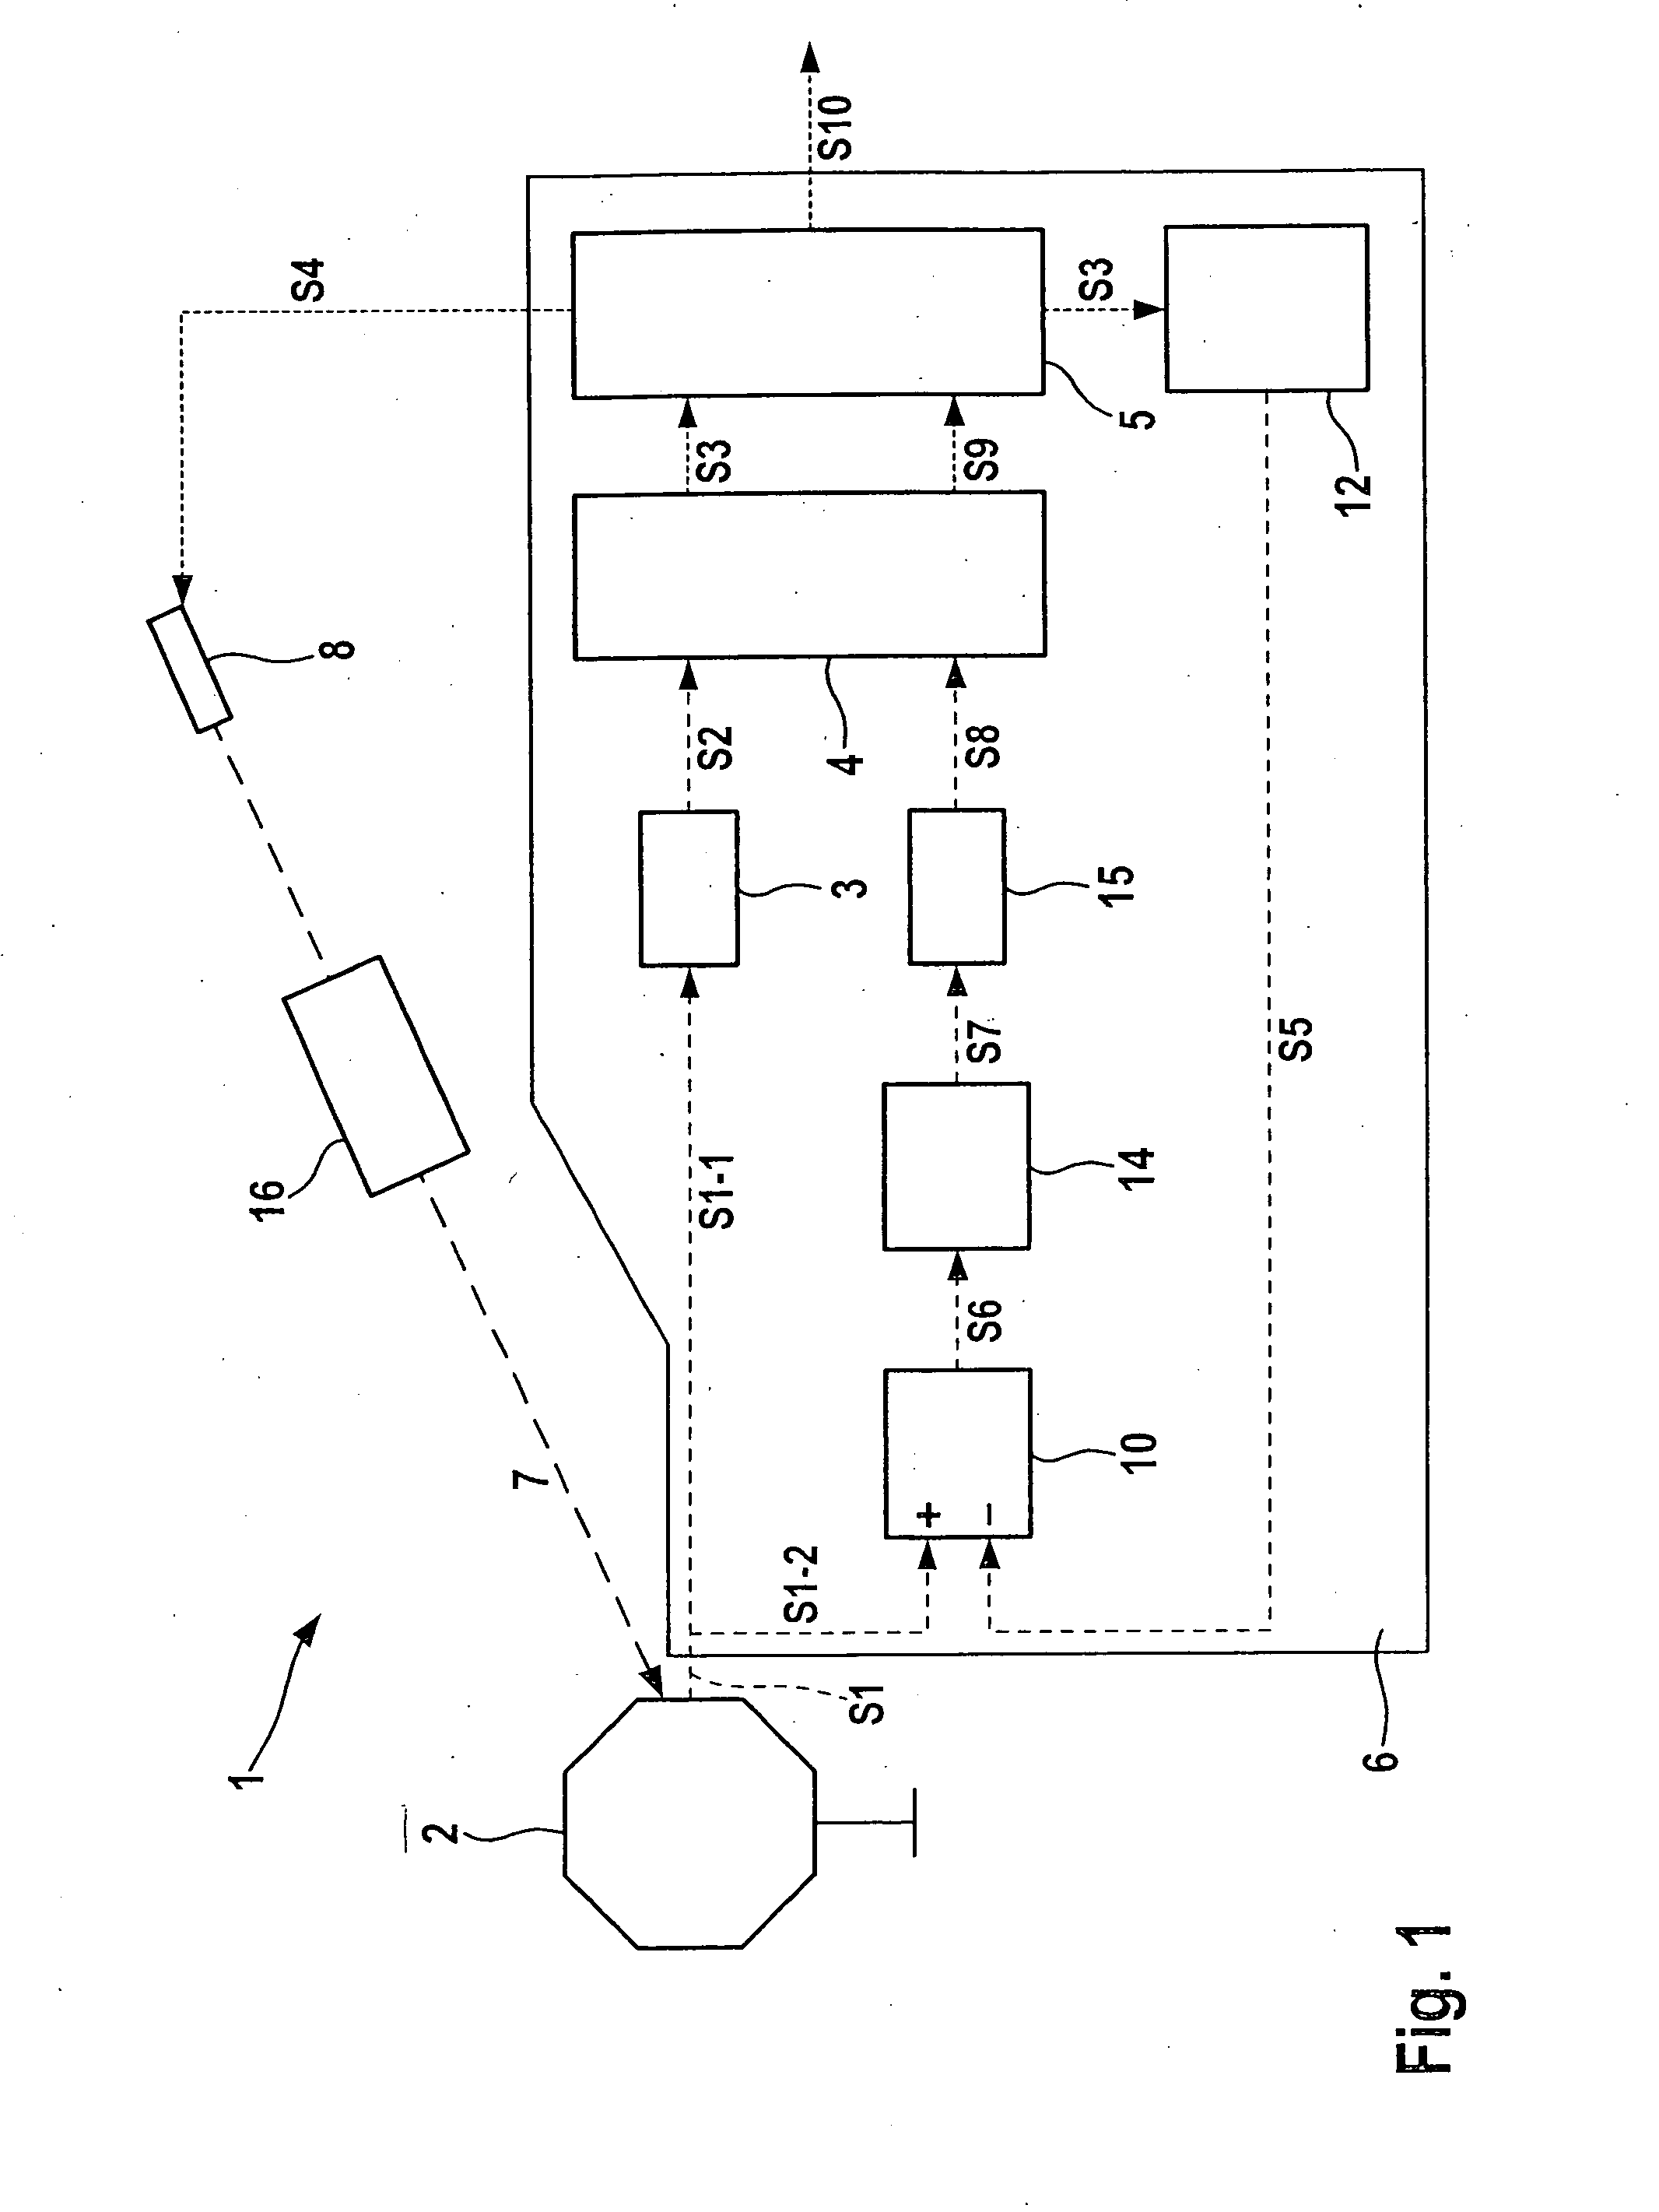 Evaluation device for evaluating measuring signals, measuring device and method for receiving and evaluating measuring signals